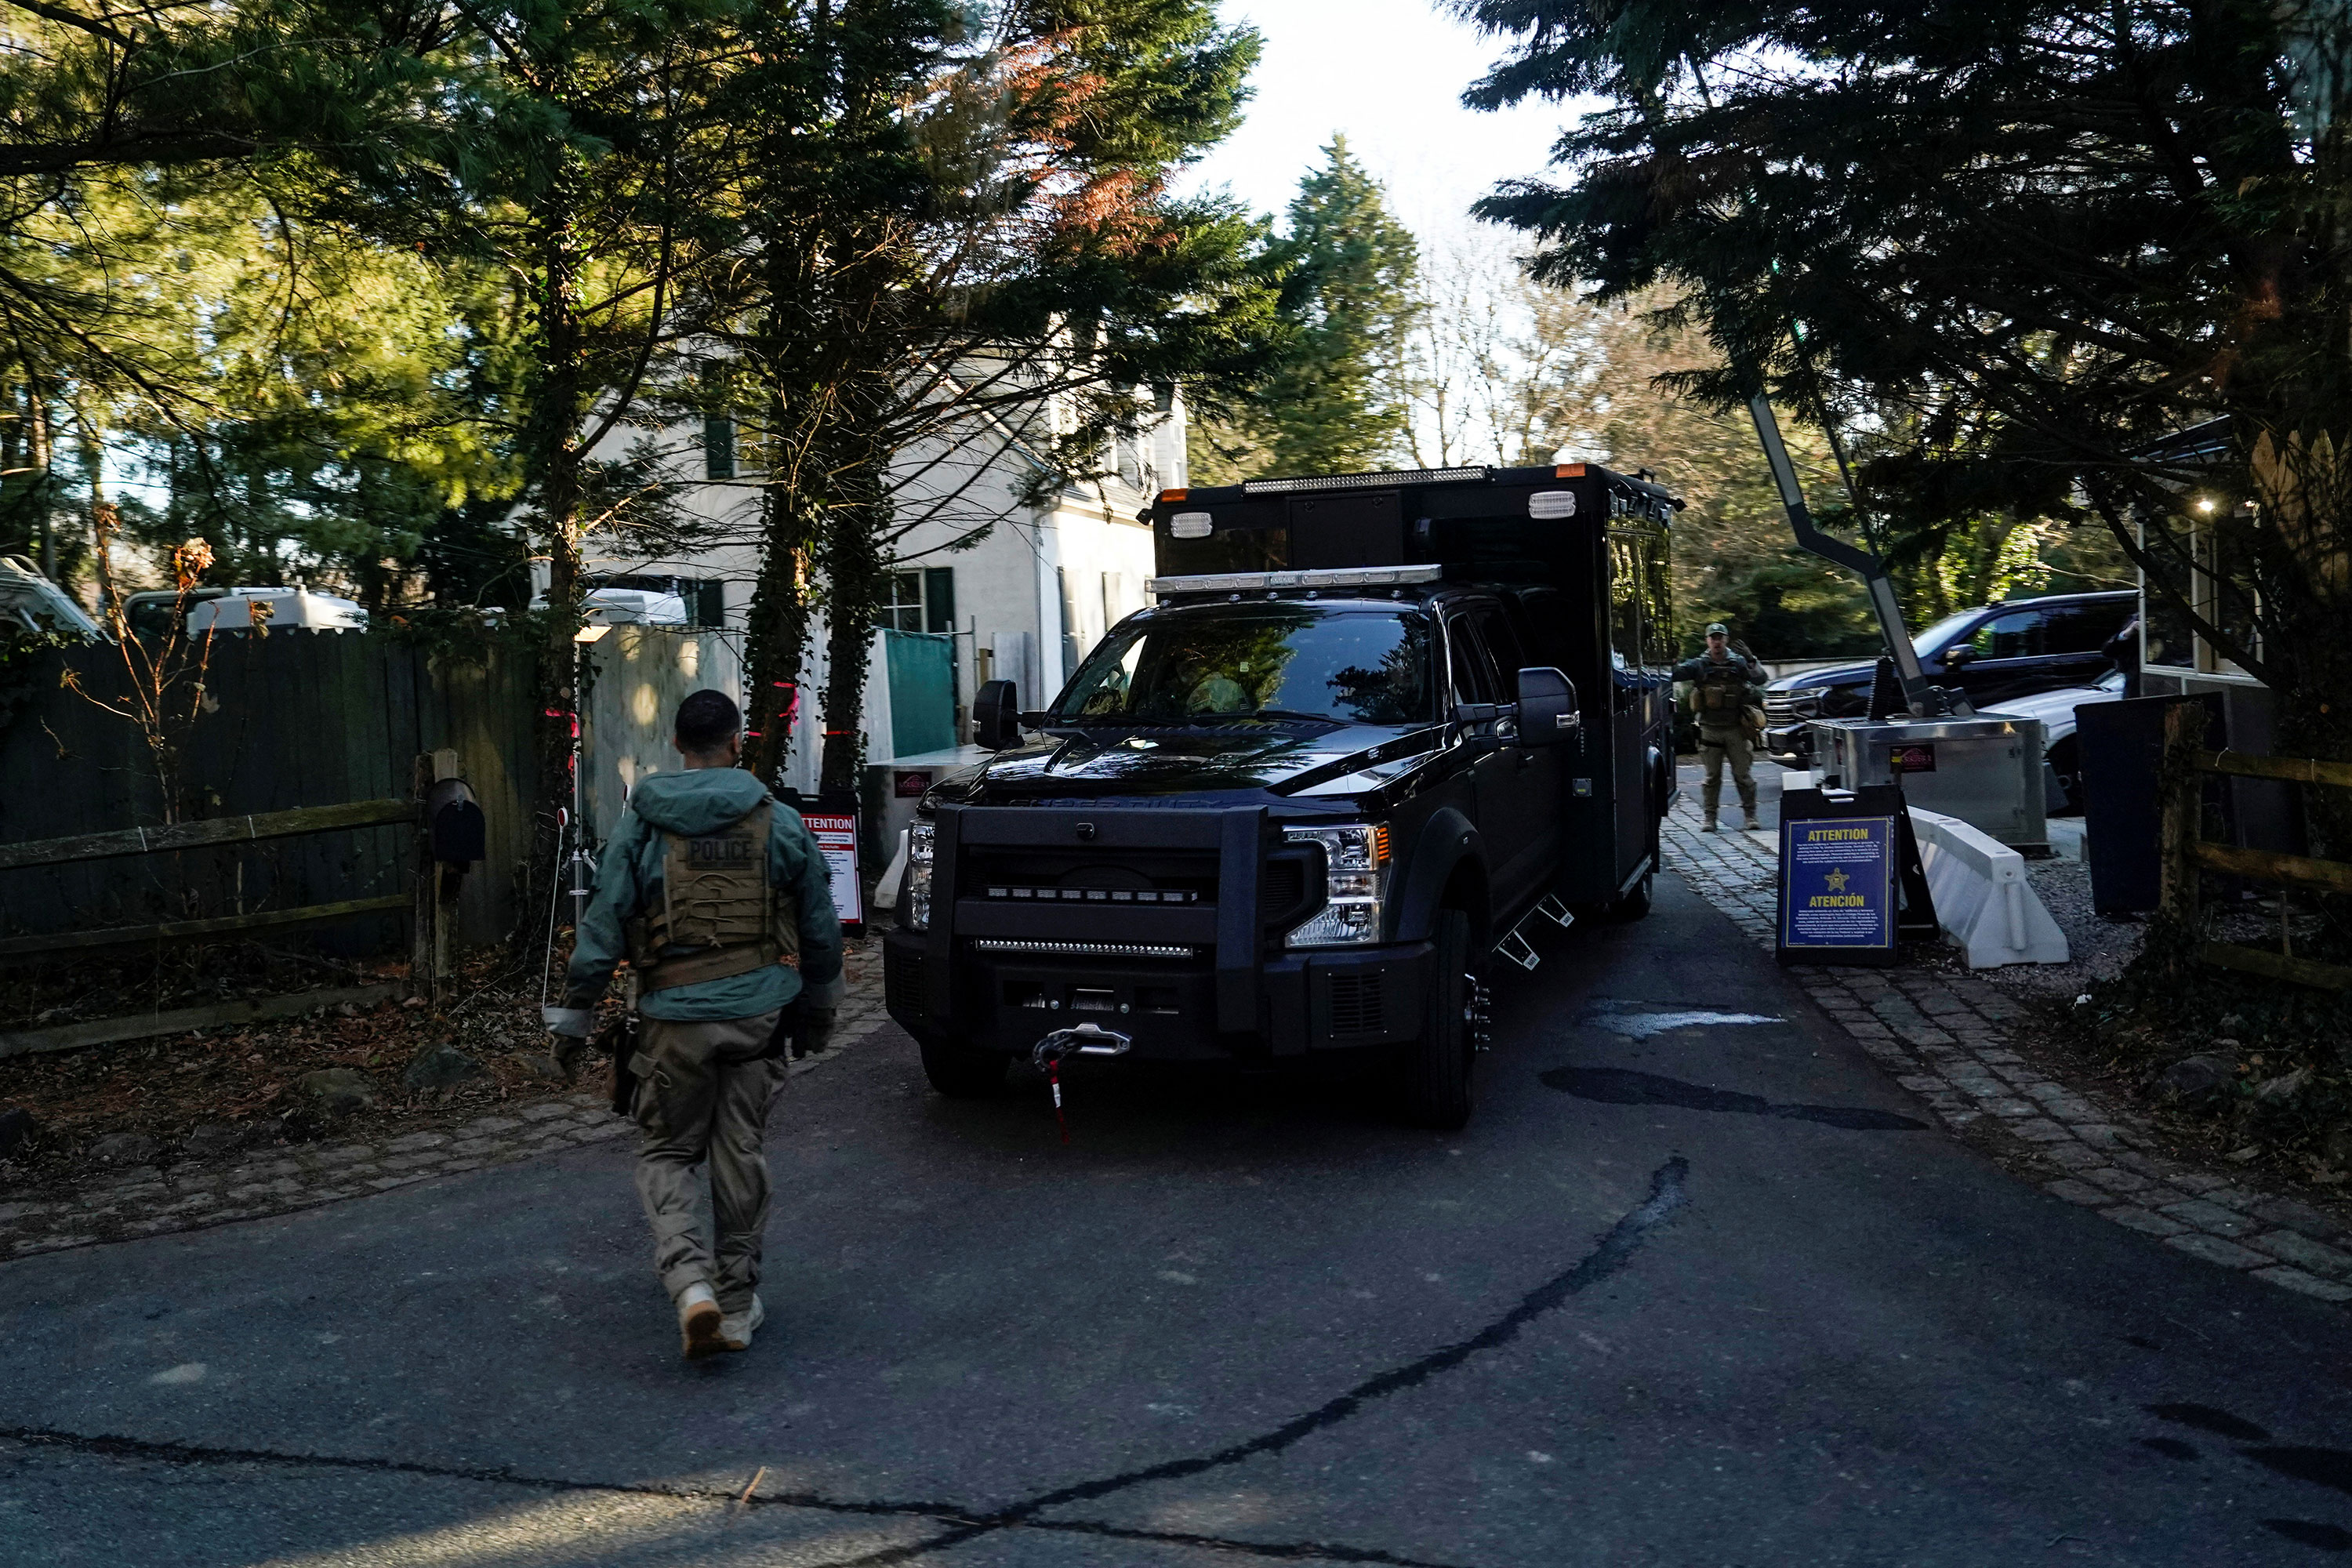 Secret Service personnel park vehicles in the driveway leading to Joe Biden's Wilmington, Delaware, home after classified documents were reported found there by the White House on January 15, 2023. 